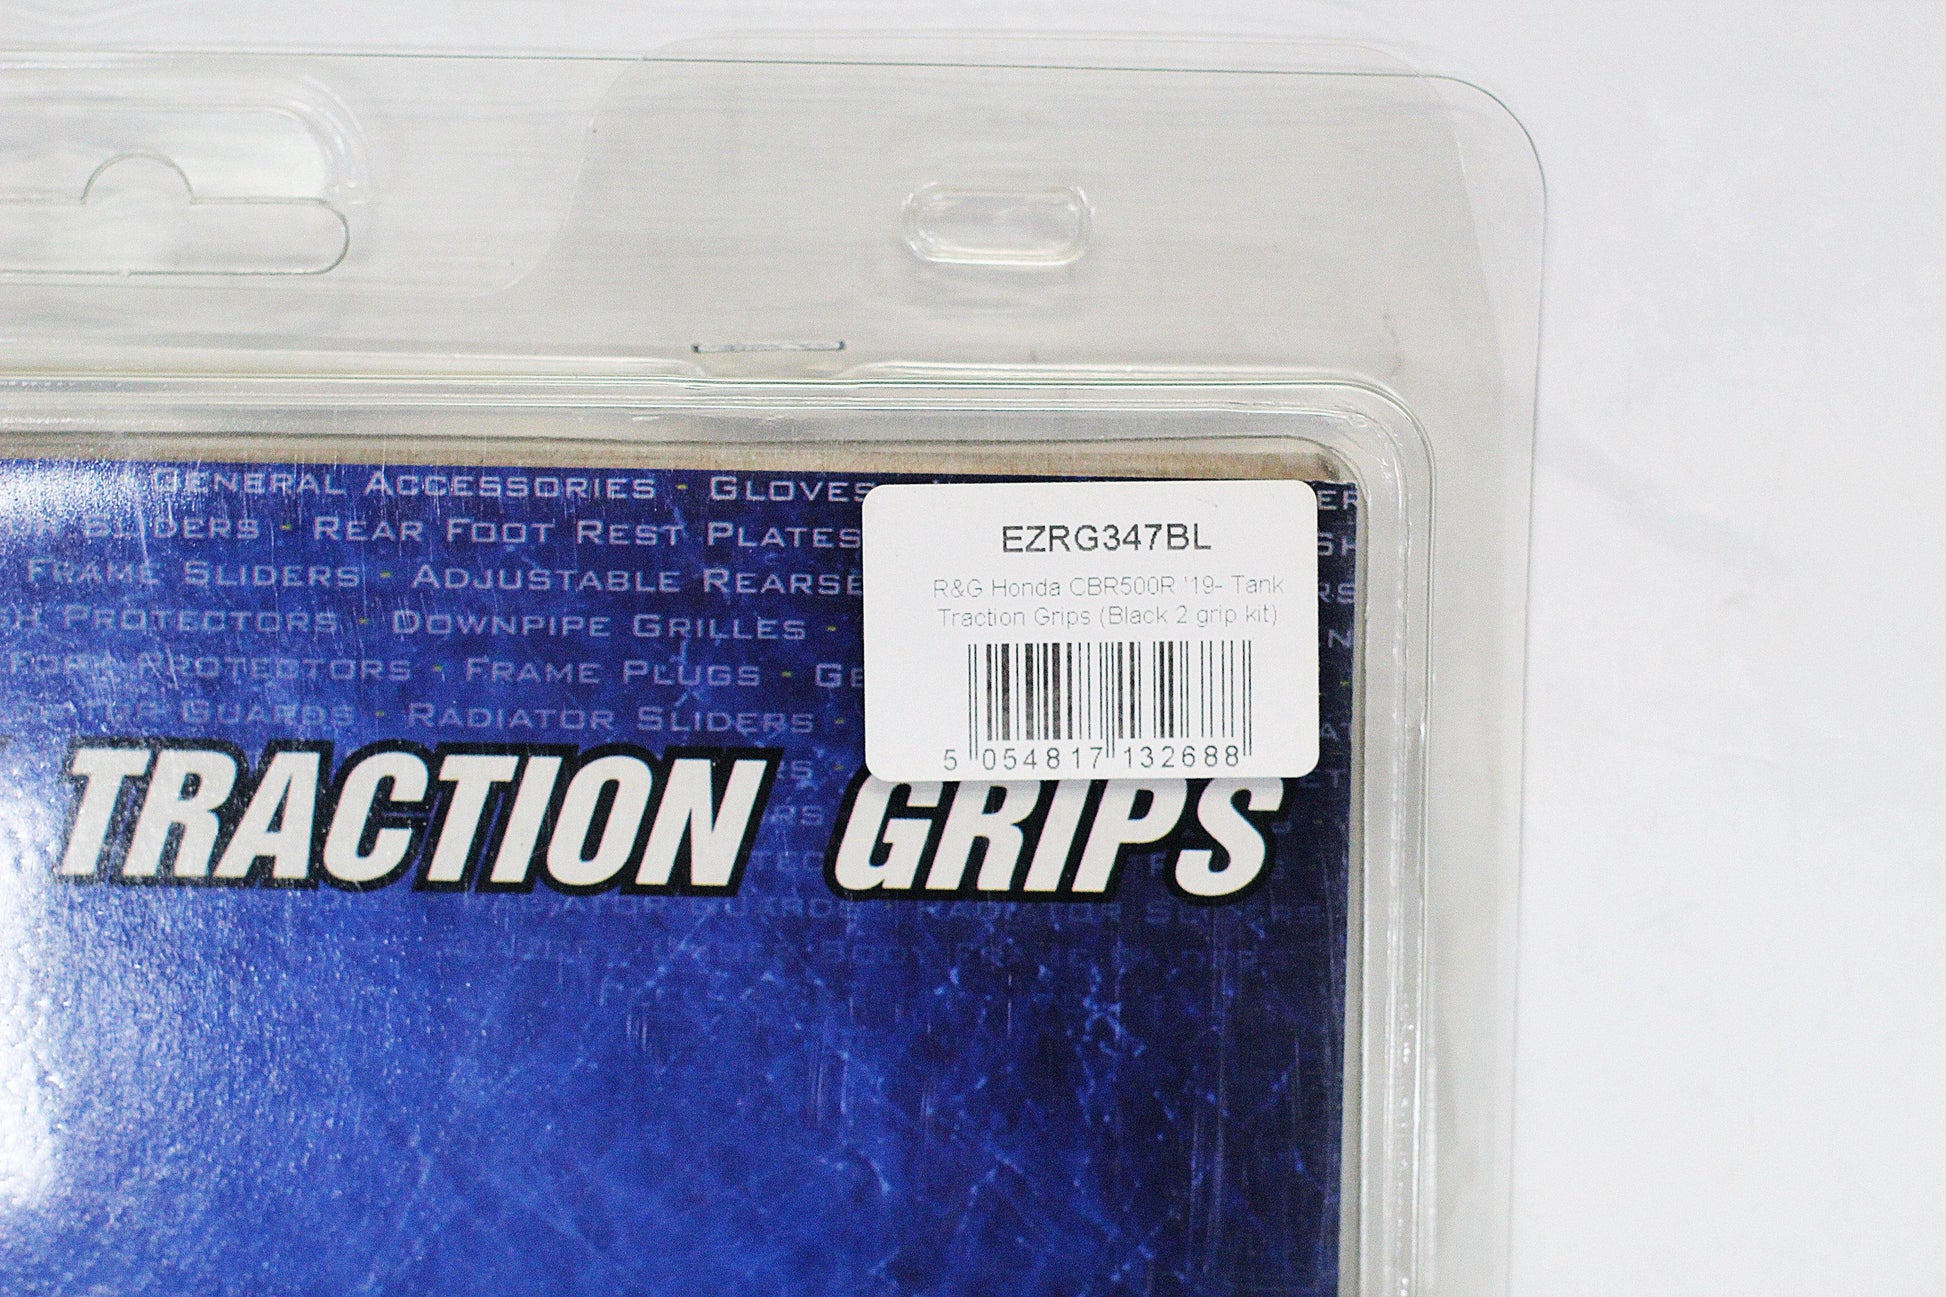 R&G Tank Traction Grip fits for Honda CBR500R ('19-) & CB500F ('19-) - Durian Bikers